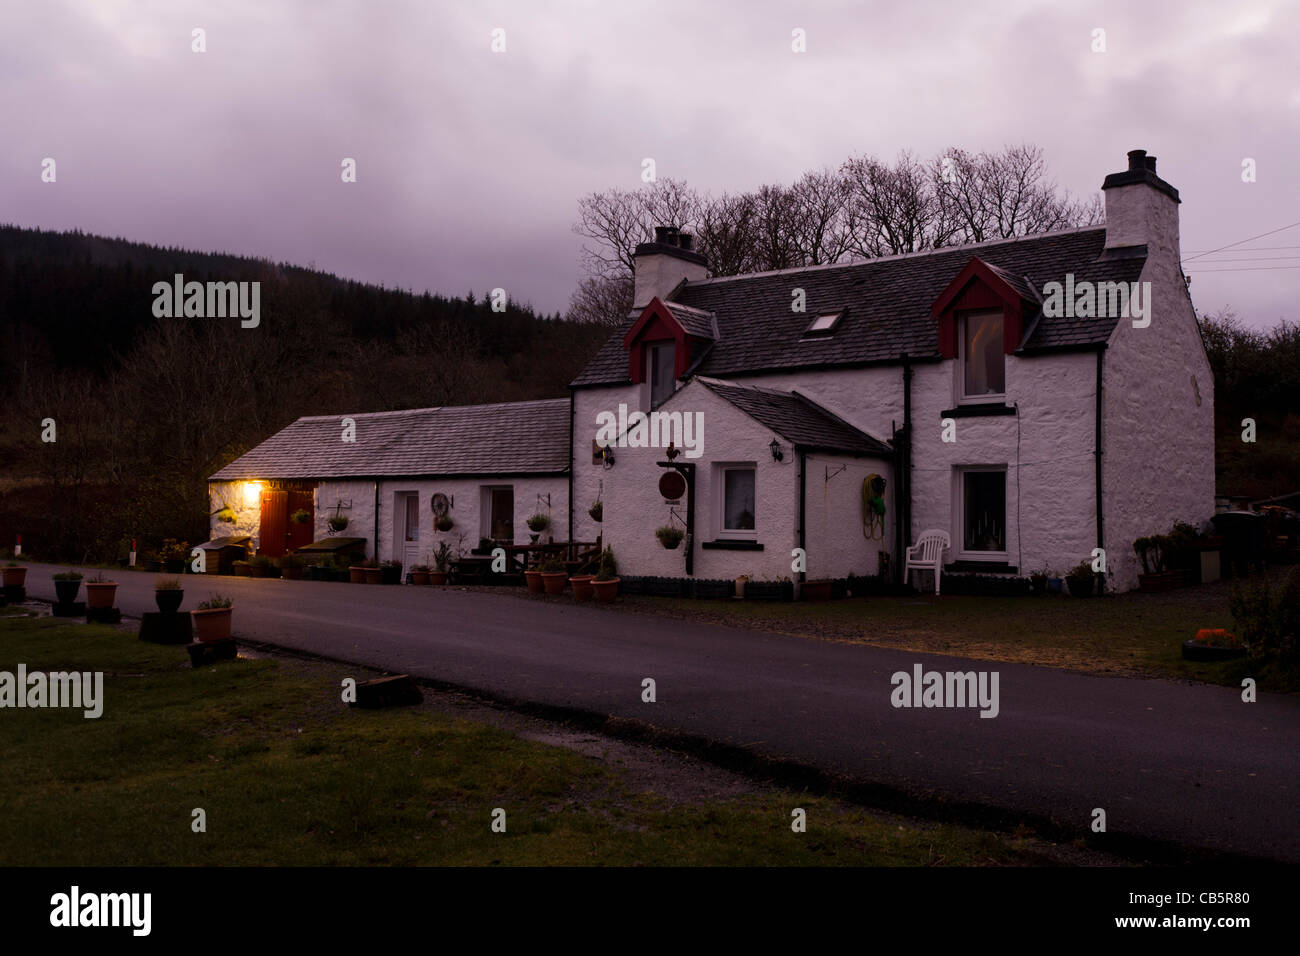 The Old Smithy (now a bed and breakfast cottage) Pennyghael, Isle of Mull, Scotland. Stock Photo